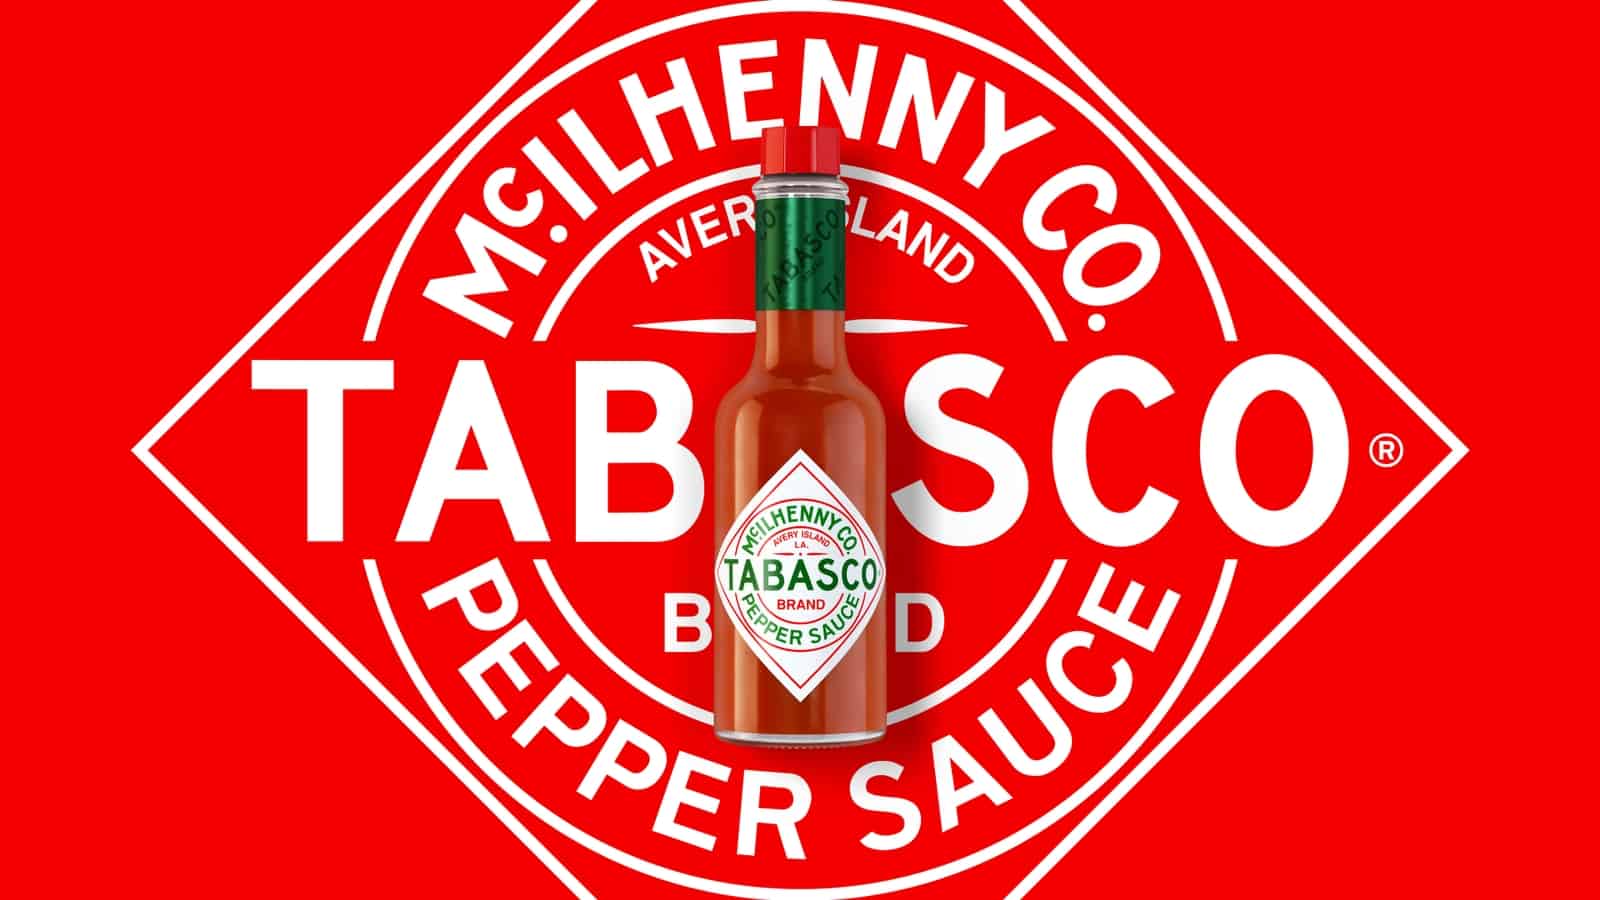 Tabasco 'Lights Things Up' With Brand Refresh By Mrs&Mr